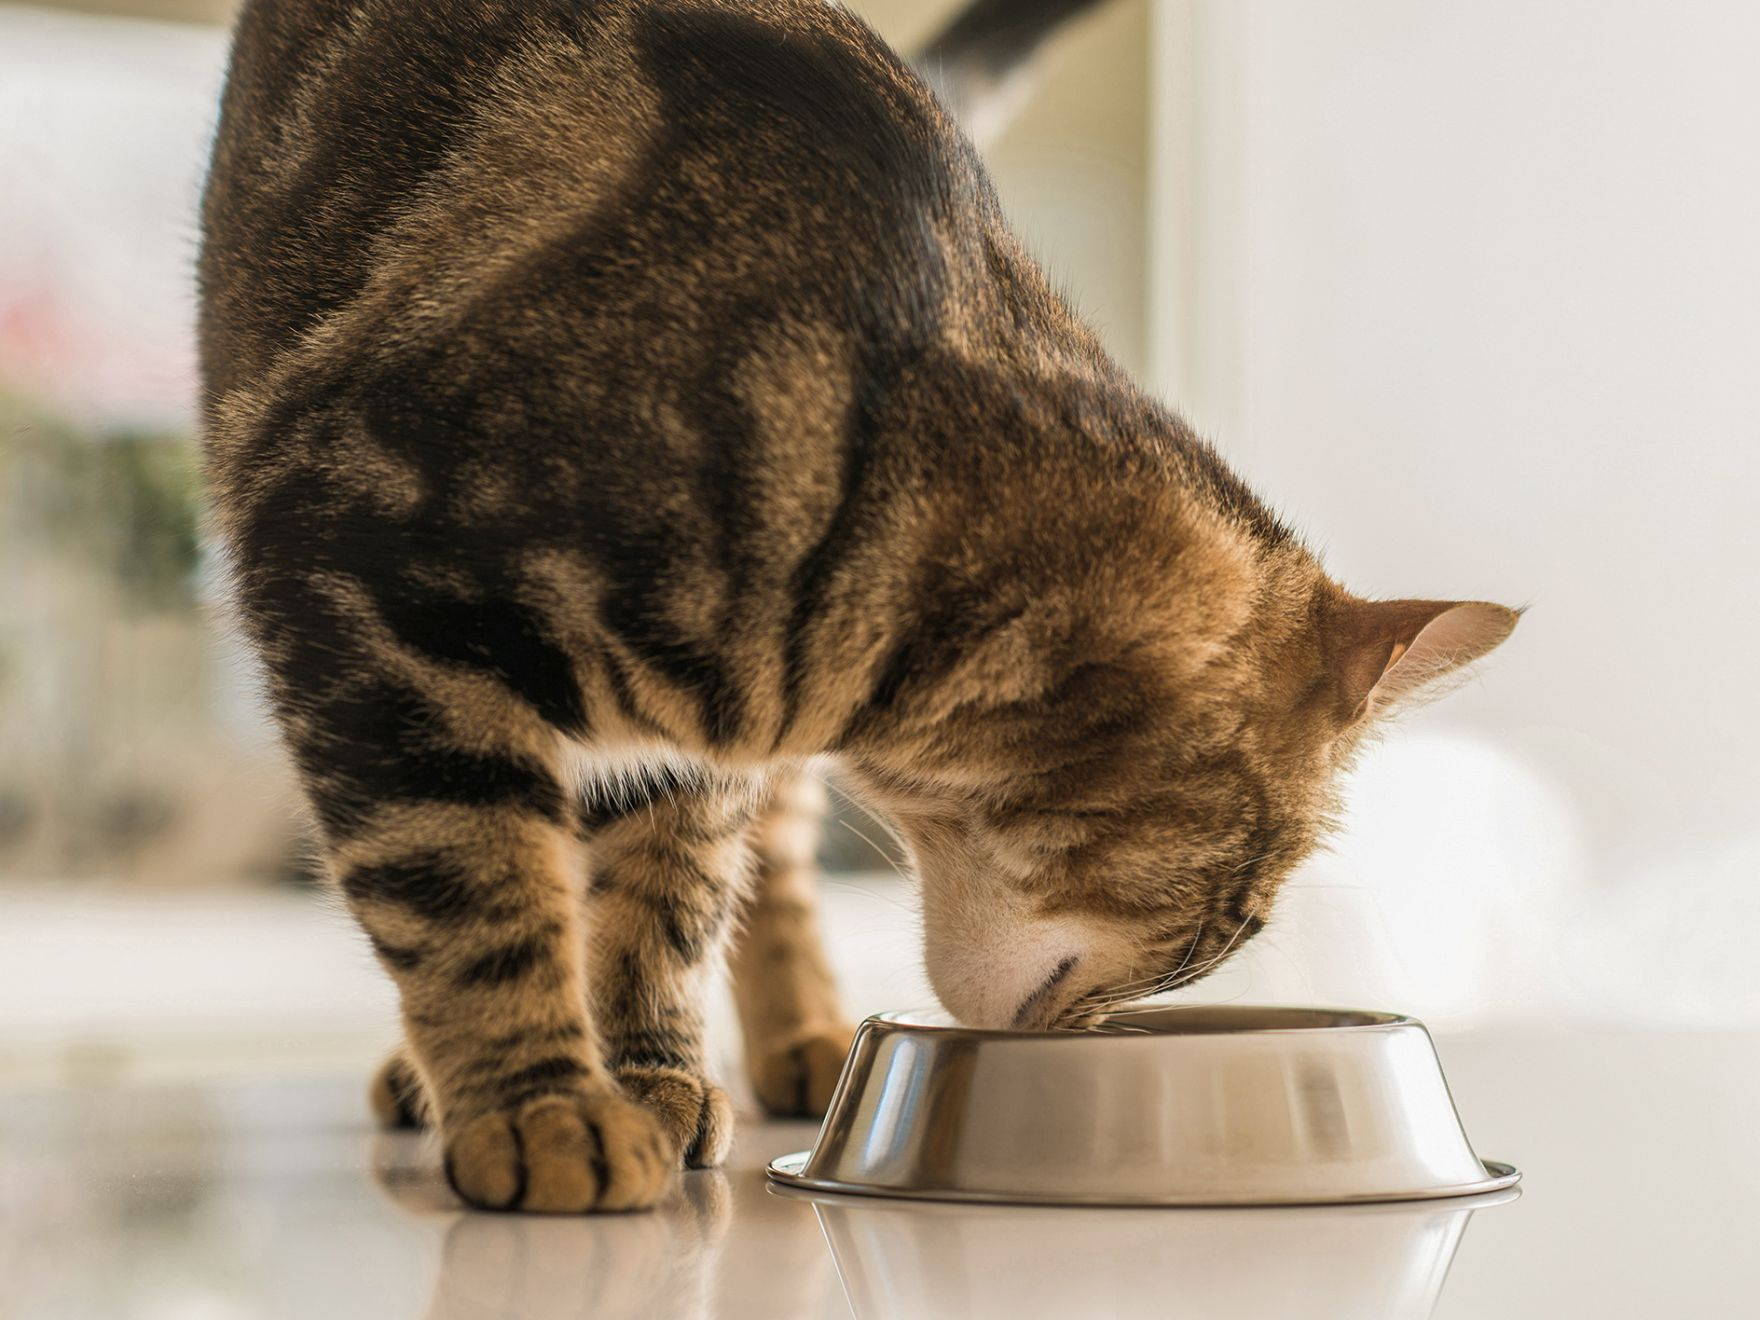 Adult cat standing indoors eating from a silver bowl